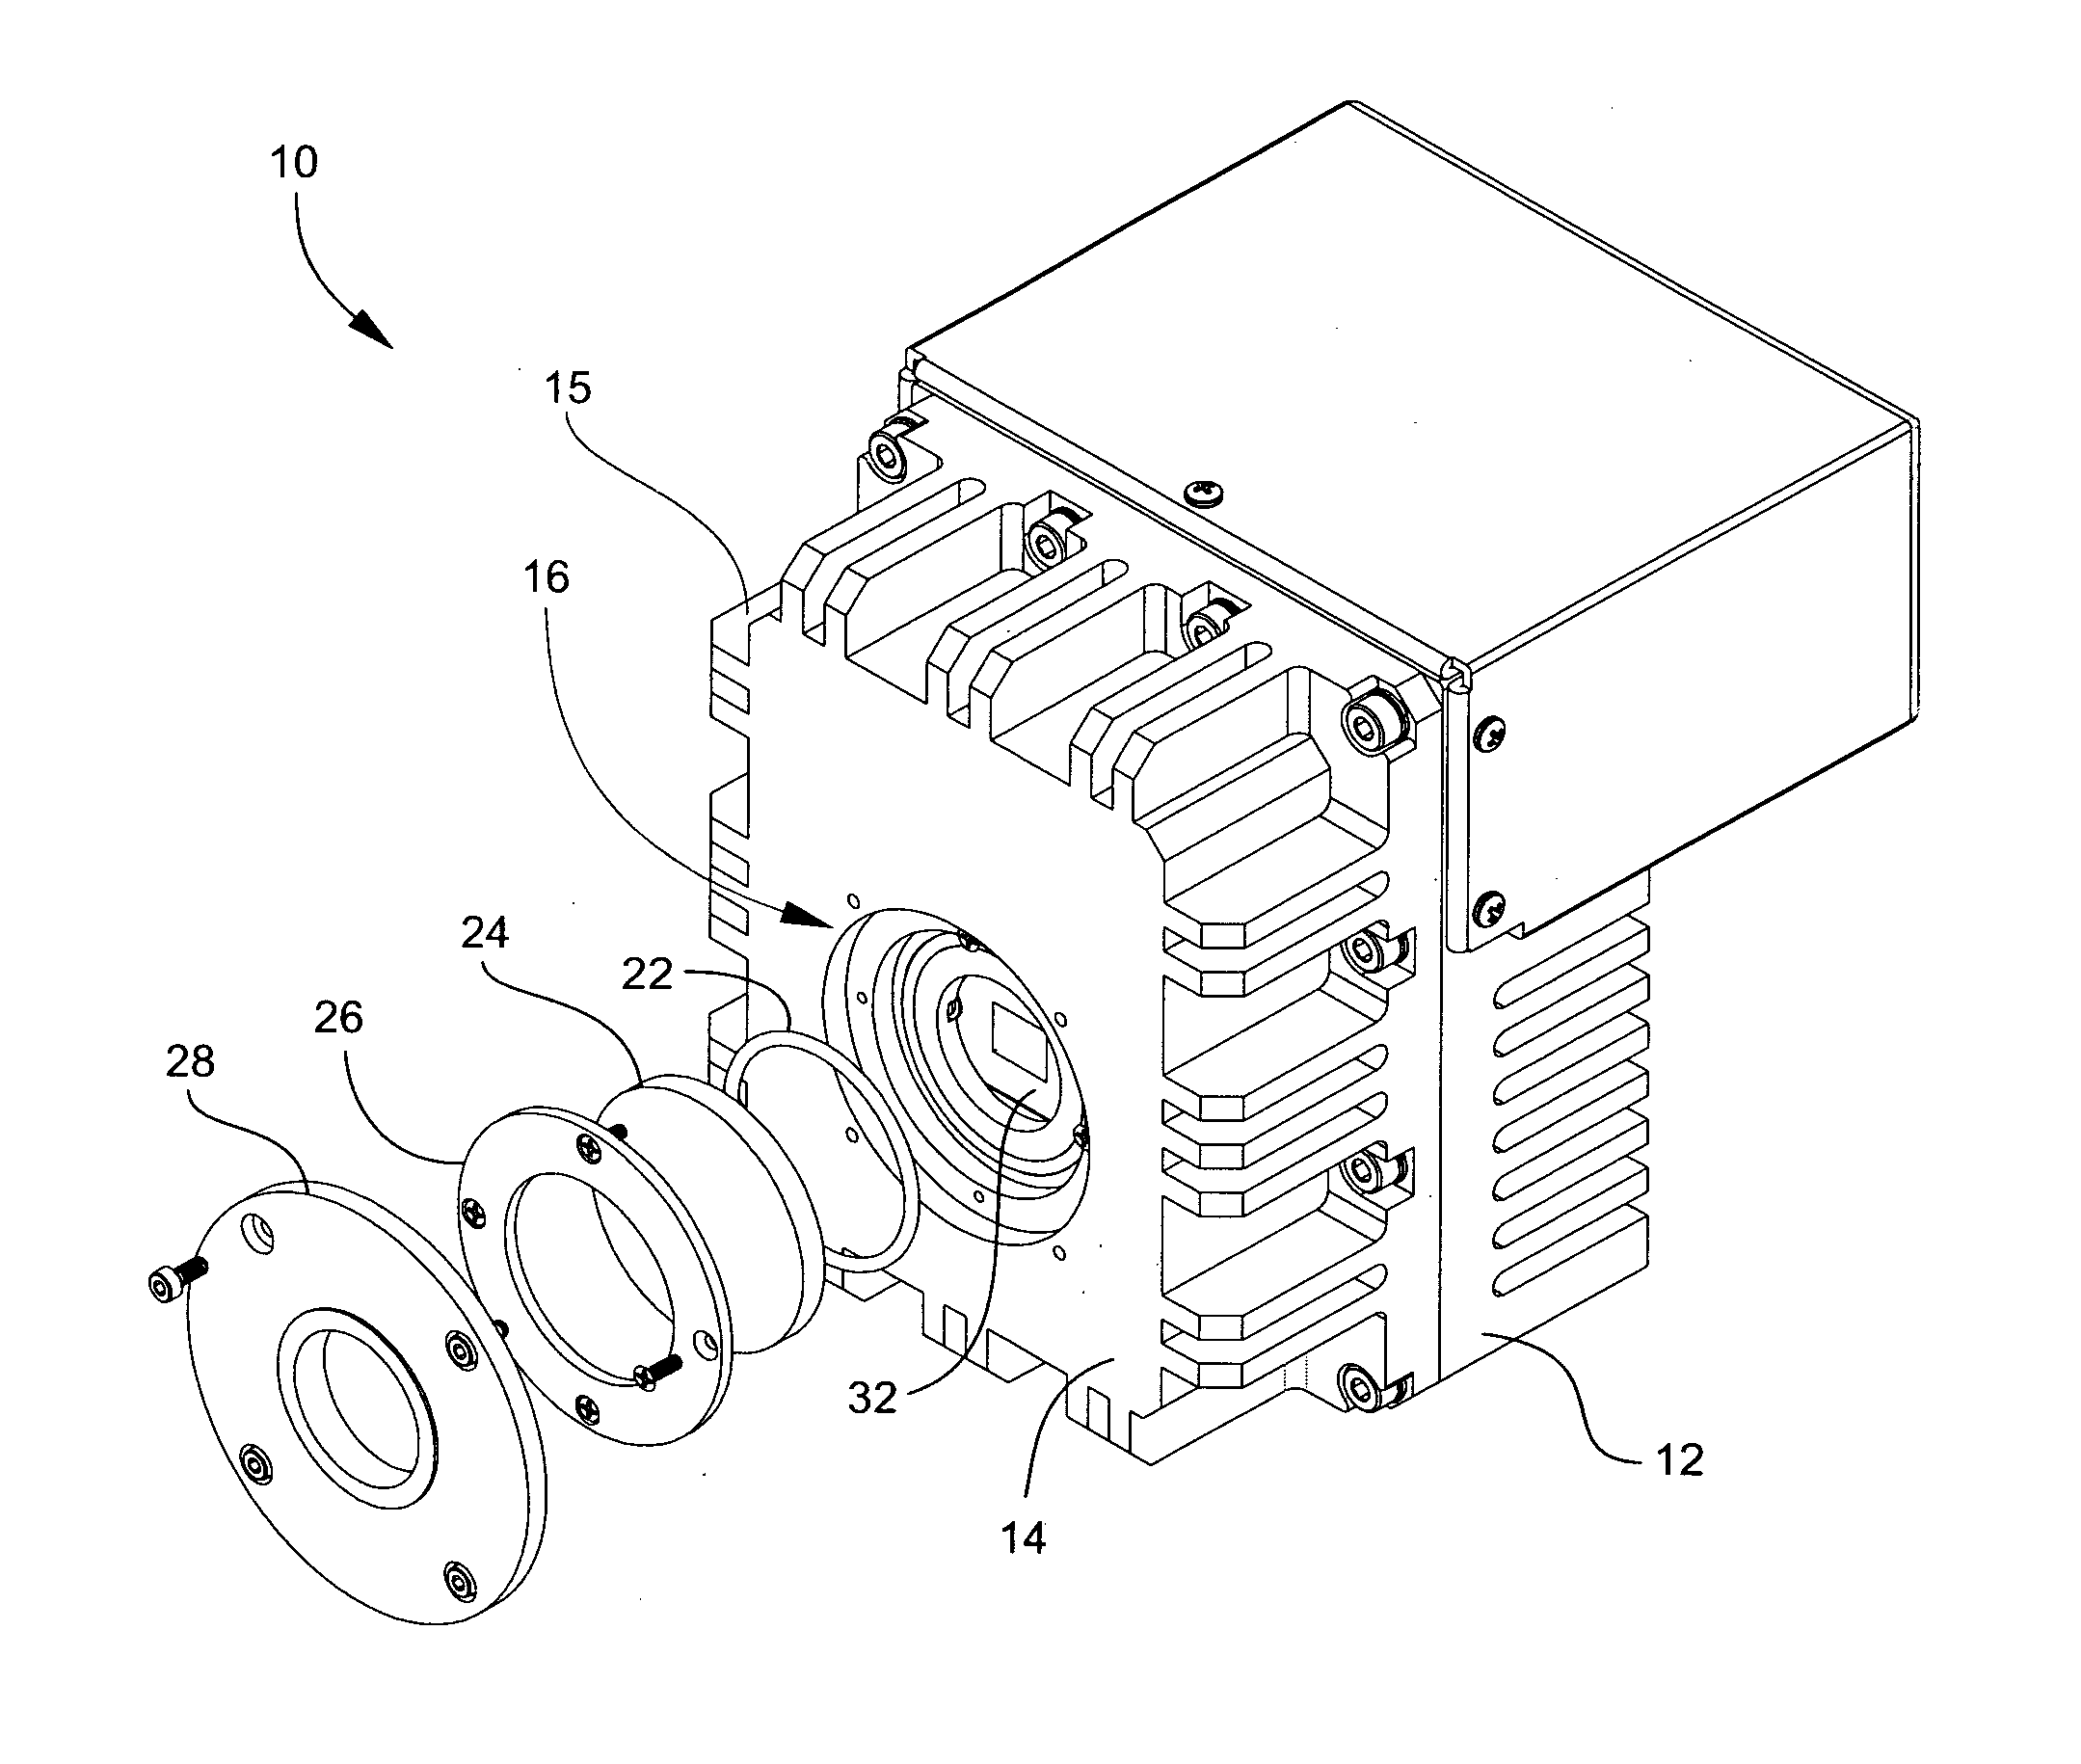 CCD camera architecture and methods of manufacture